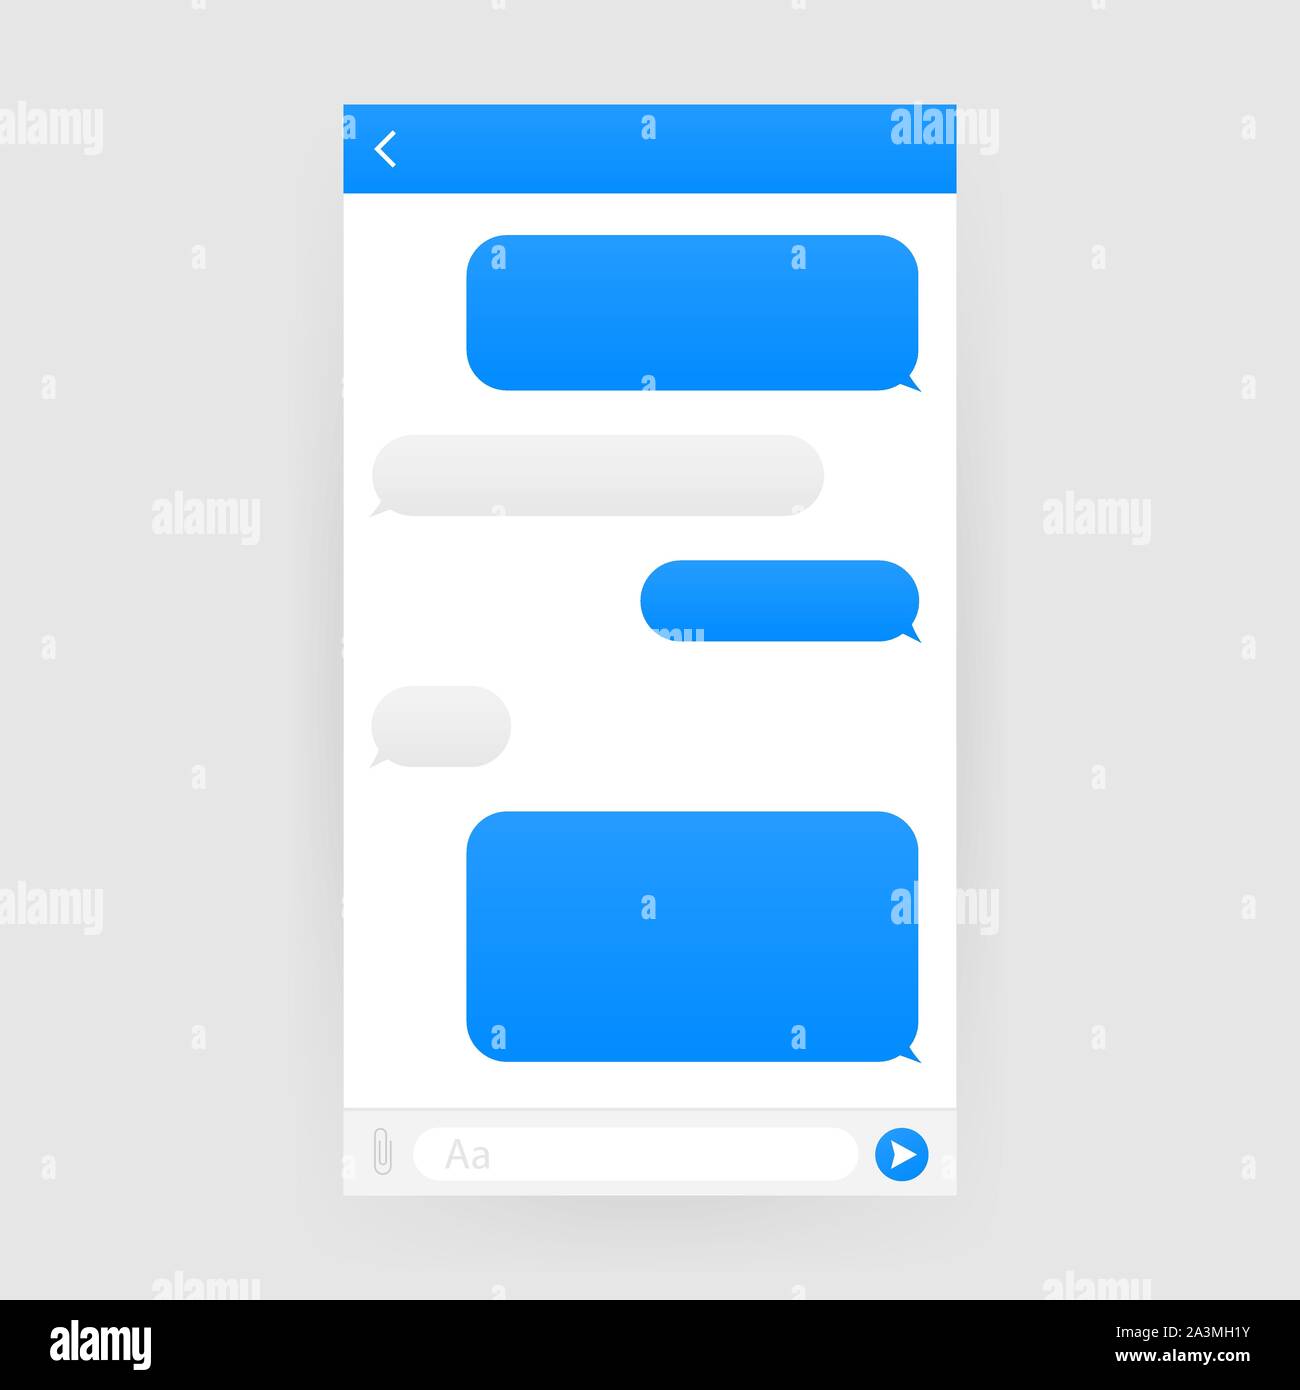 Chat Interface Application with Dialogue window. Clean Mobile UI Design Concept. Sms Messenger. Vector illustration. Stock Vector